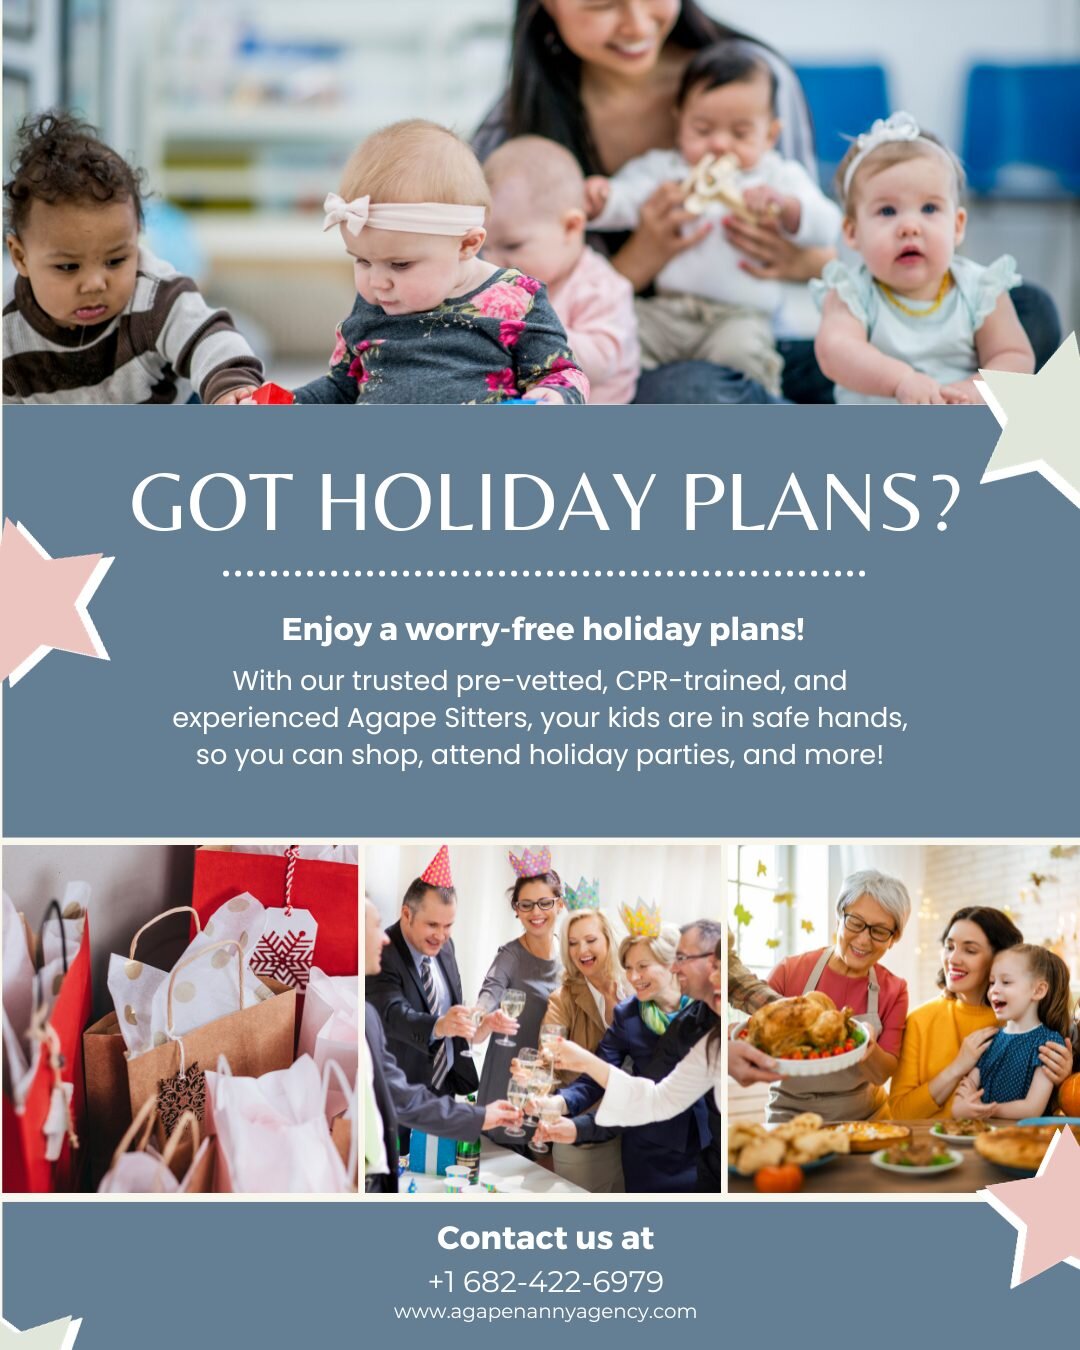 ✨ Enjoy a worry-free holiday season with Agape Sitters! ✨

With our trusted pre-vetted, CPR-trained, and experienced sitters, your kids are in safe hands, so you can:

🛍️ Shop 'til you drop
🥳 Attend holiday parties stress-free
🍽️ Savor those festi